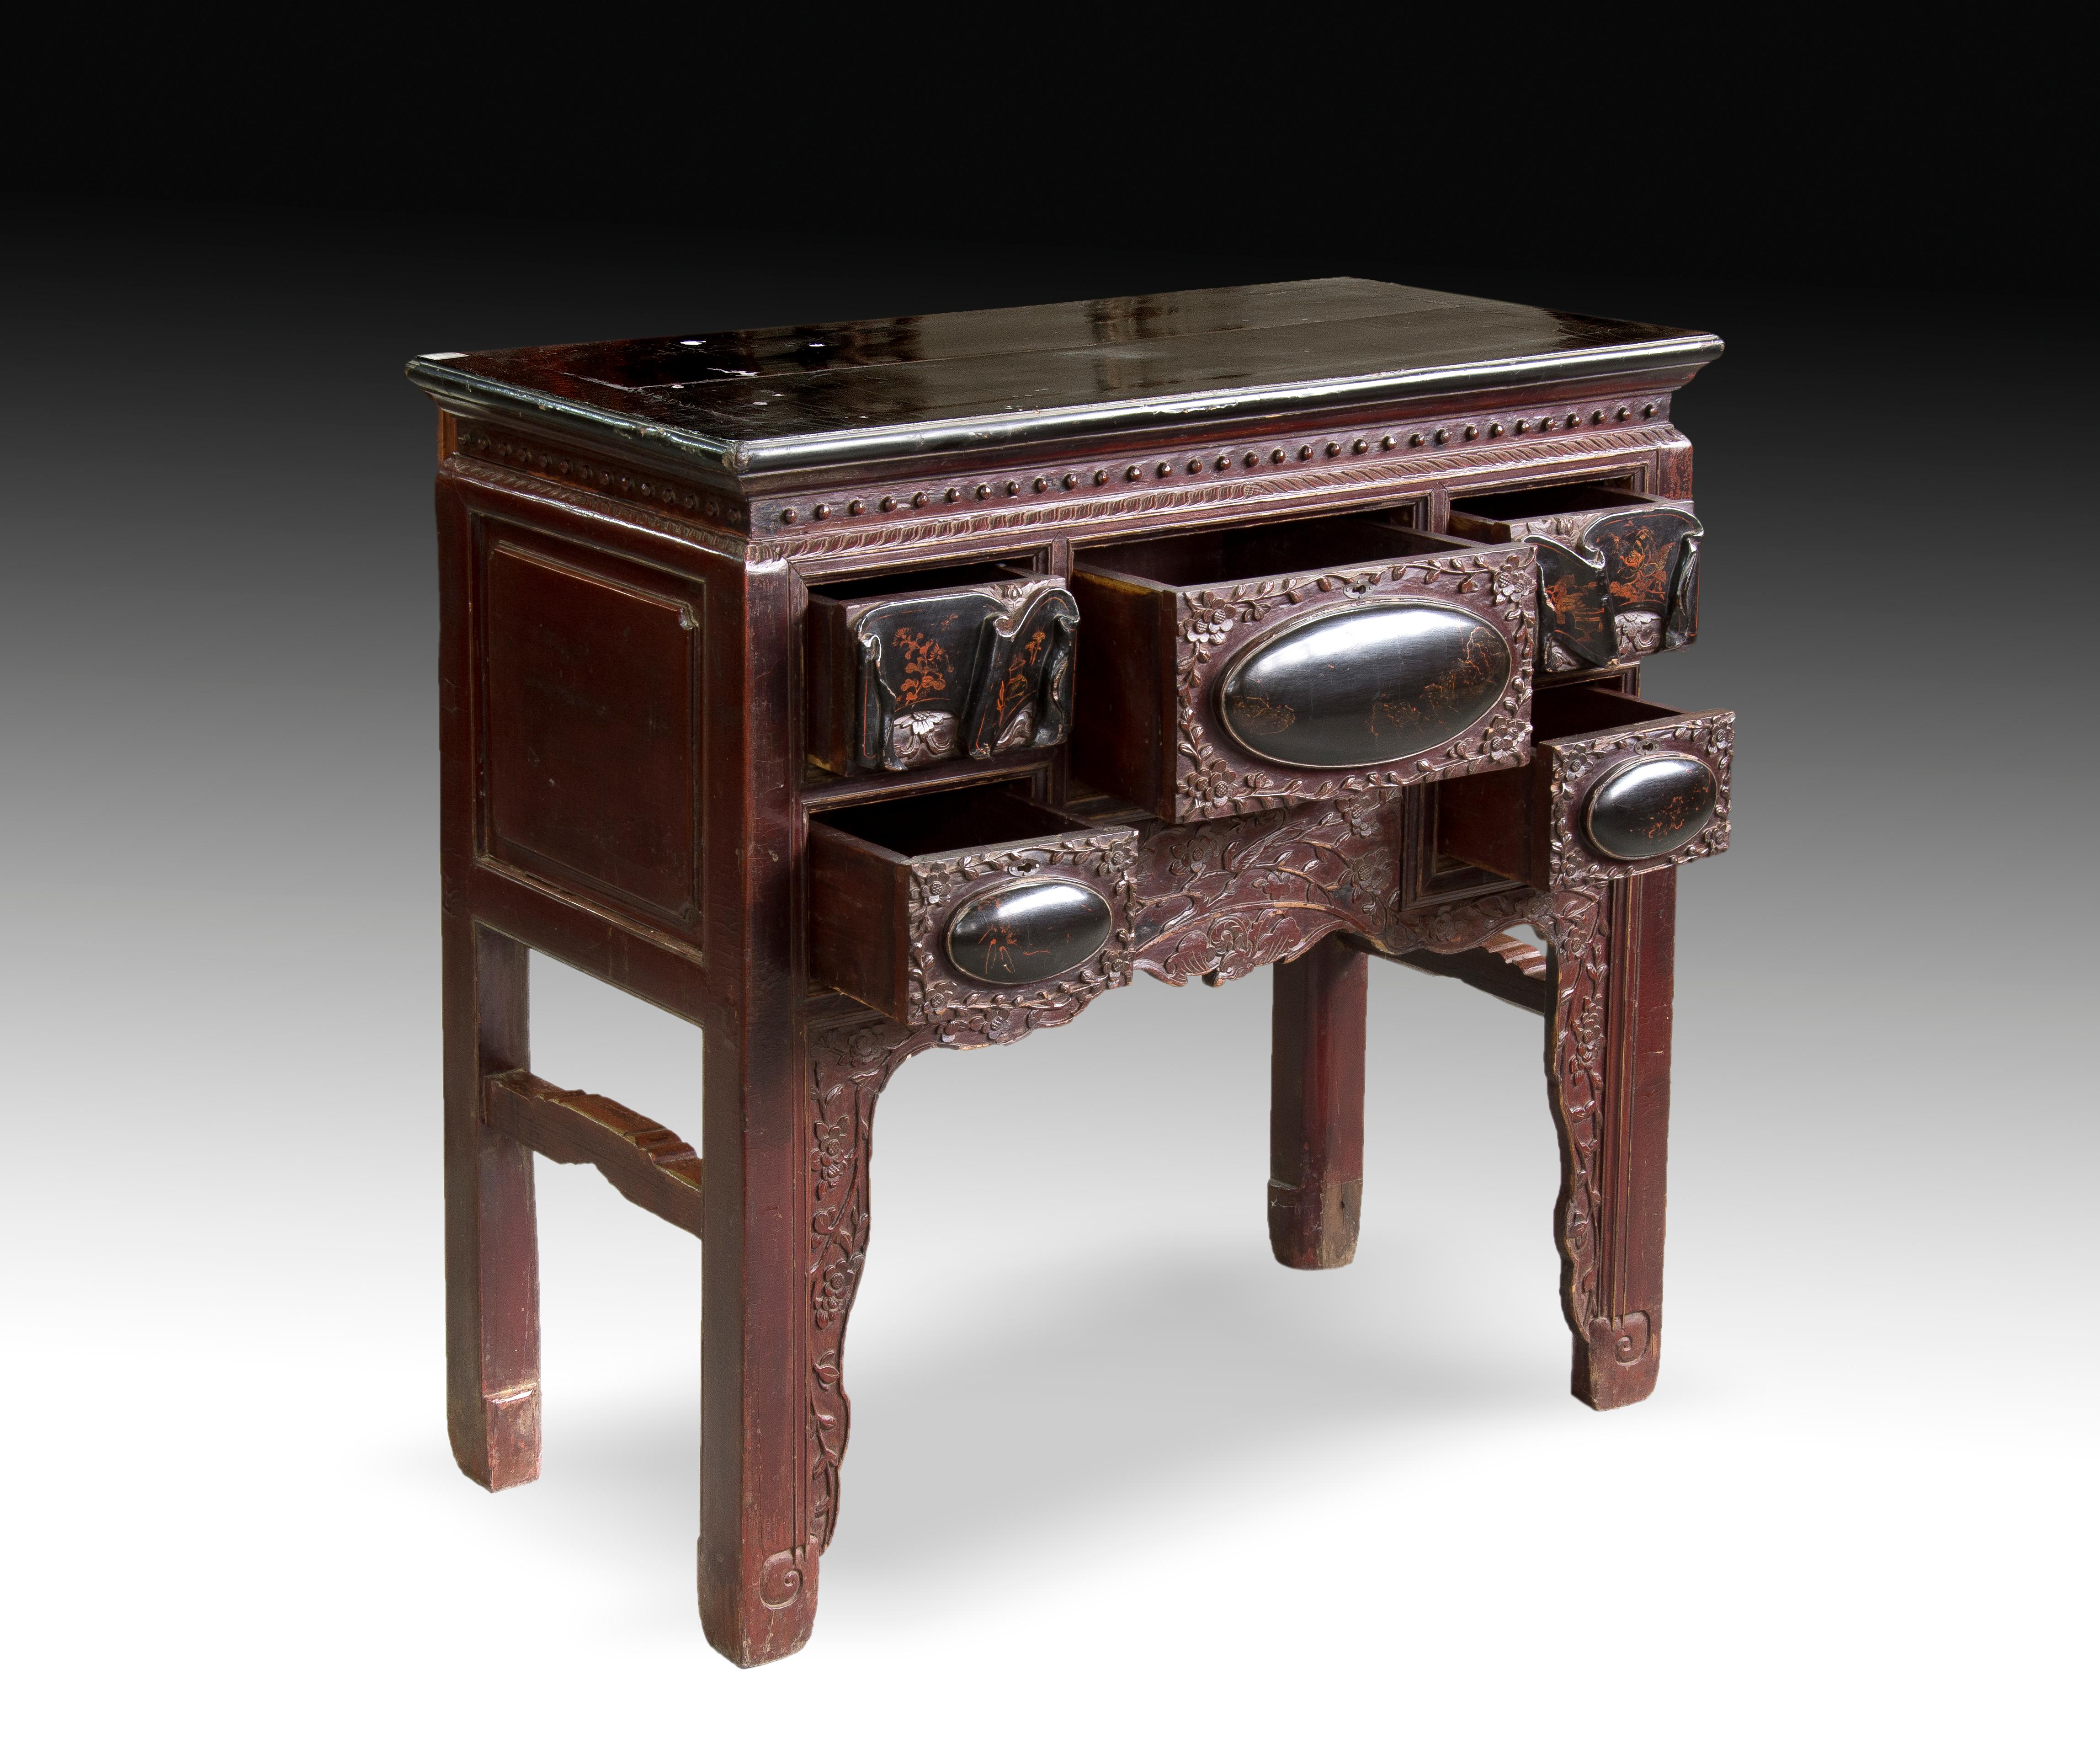 Four-legged table with a rectangular board slightly protruding from the body of the piece of furniture and a front carved in relief not too pronounced, clearly distinguishing each of the five drawers it presents. Both the decorative motifs, the